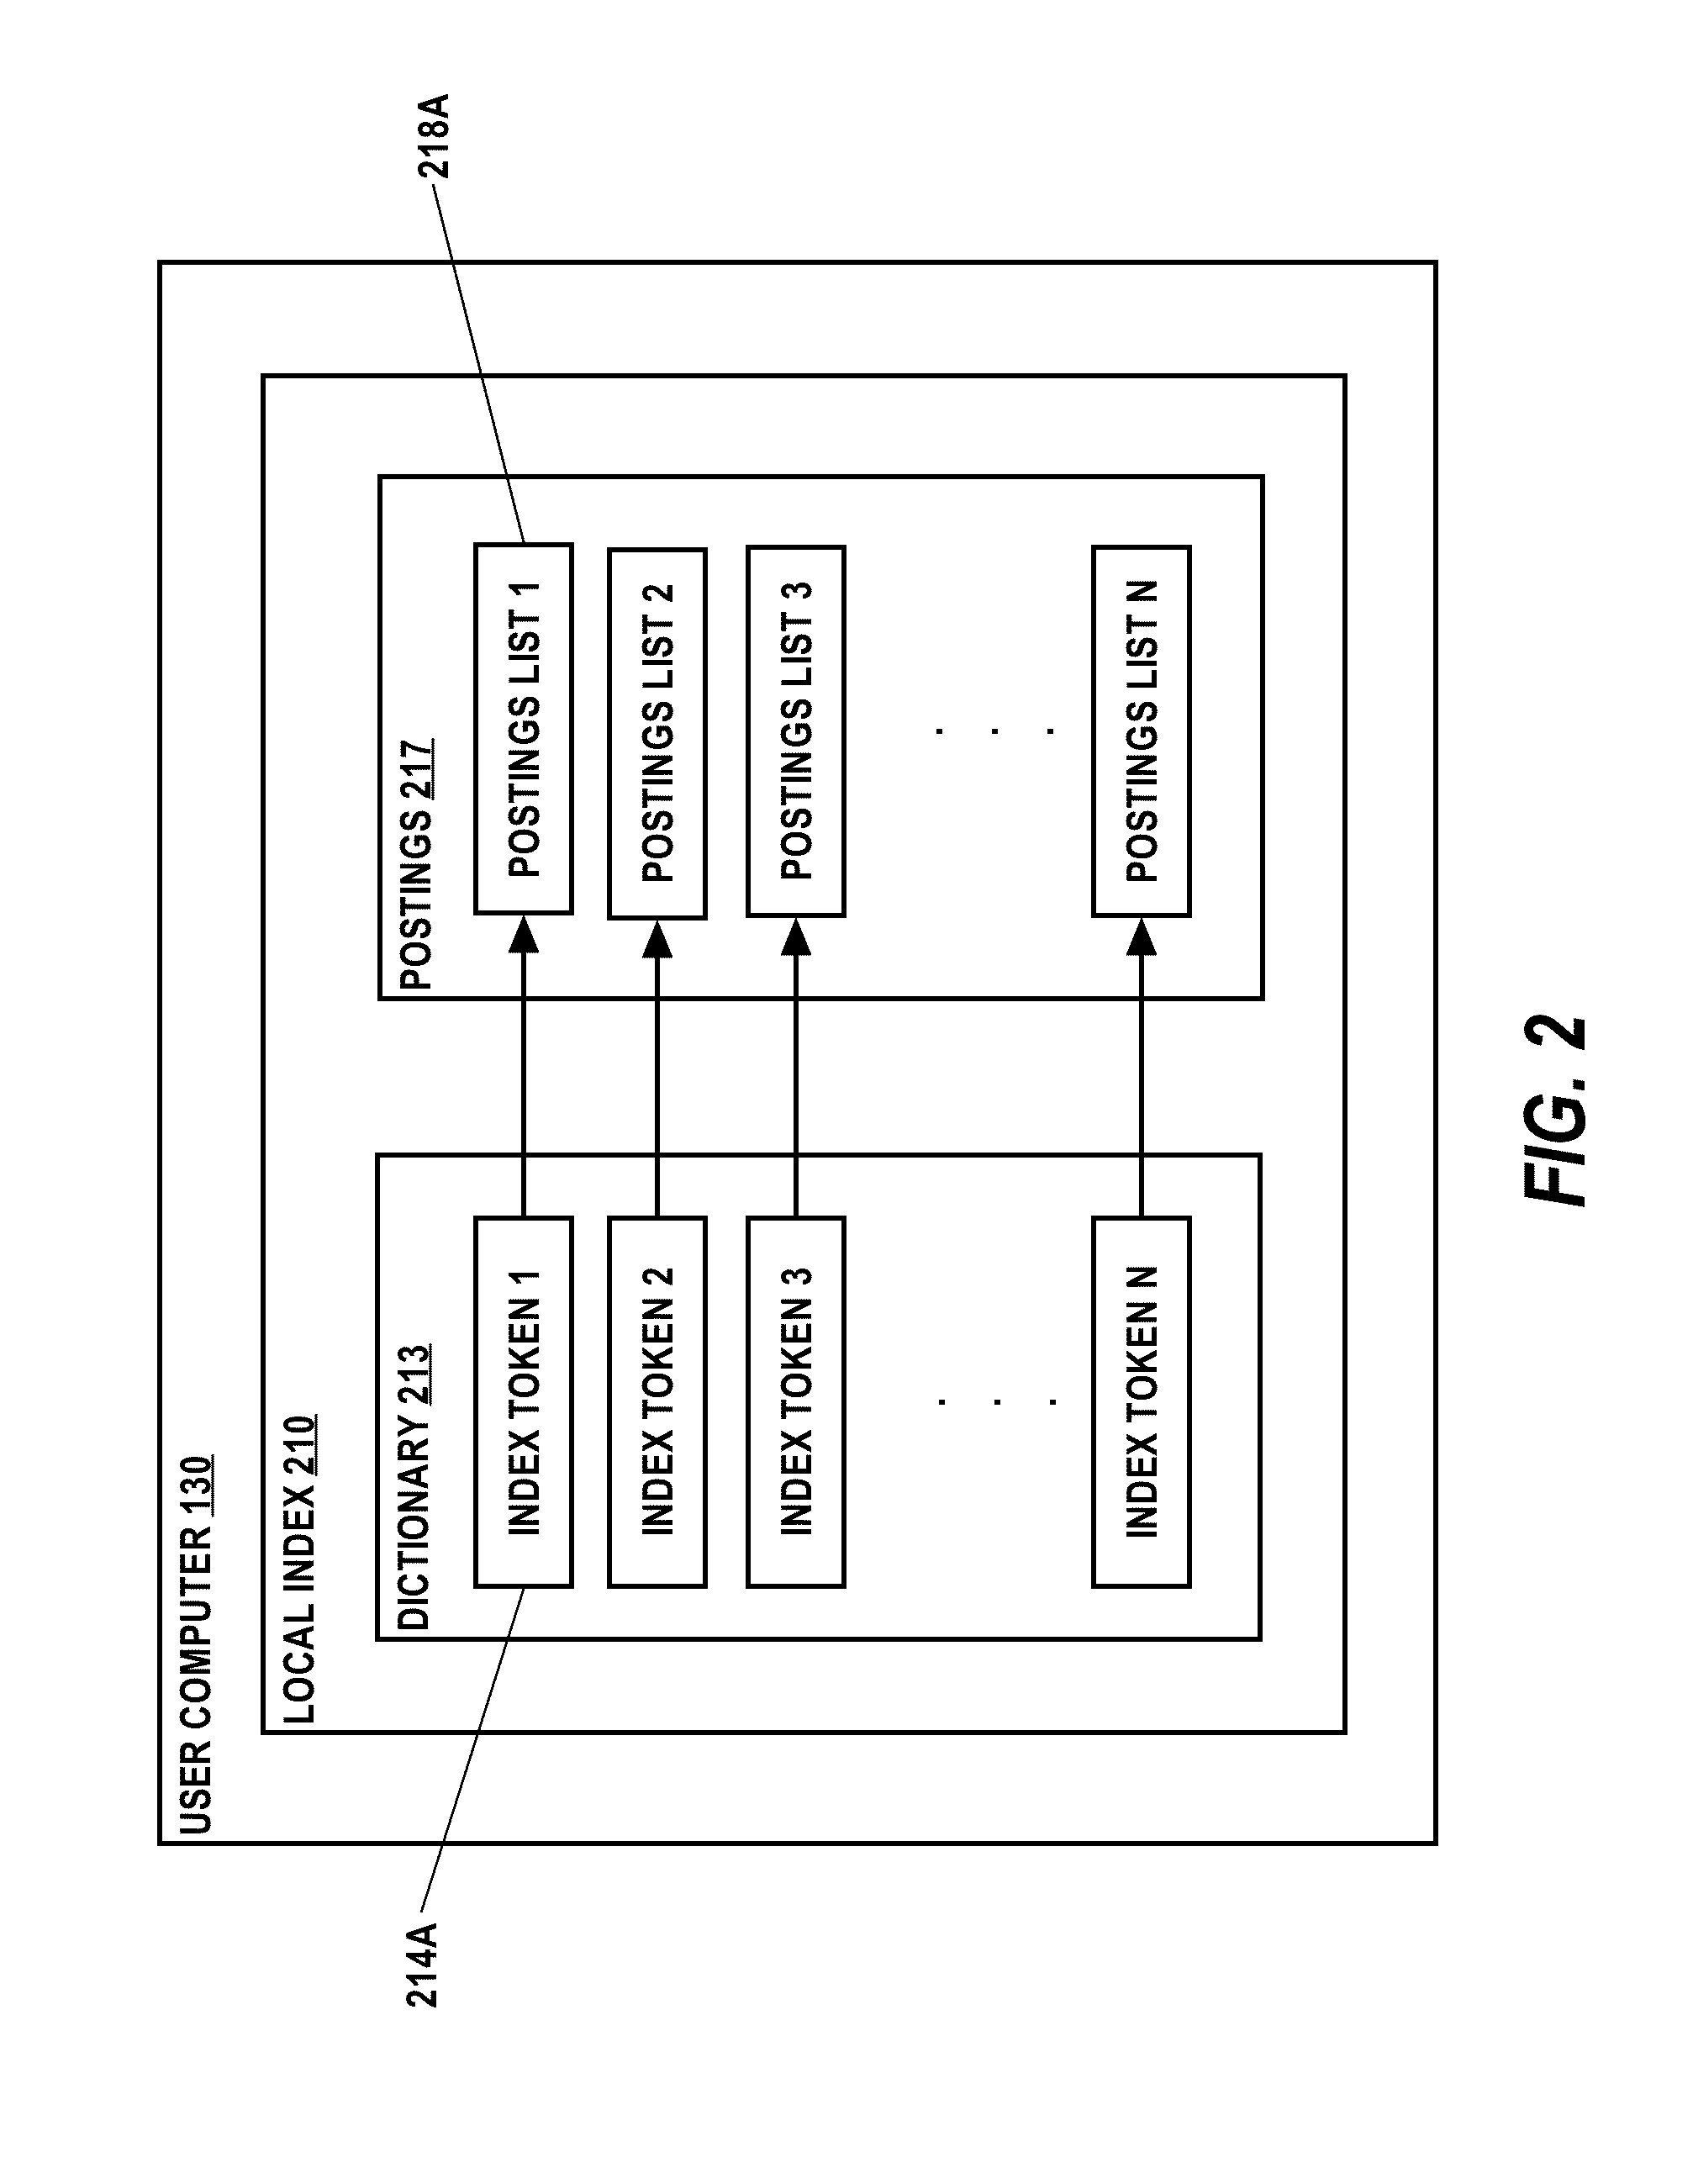 Personal content item searching system and method